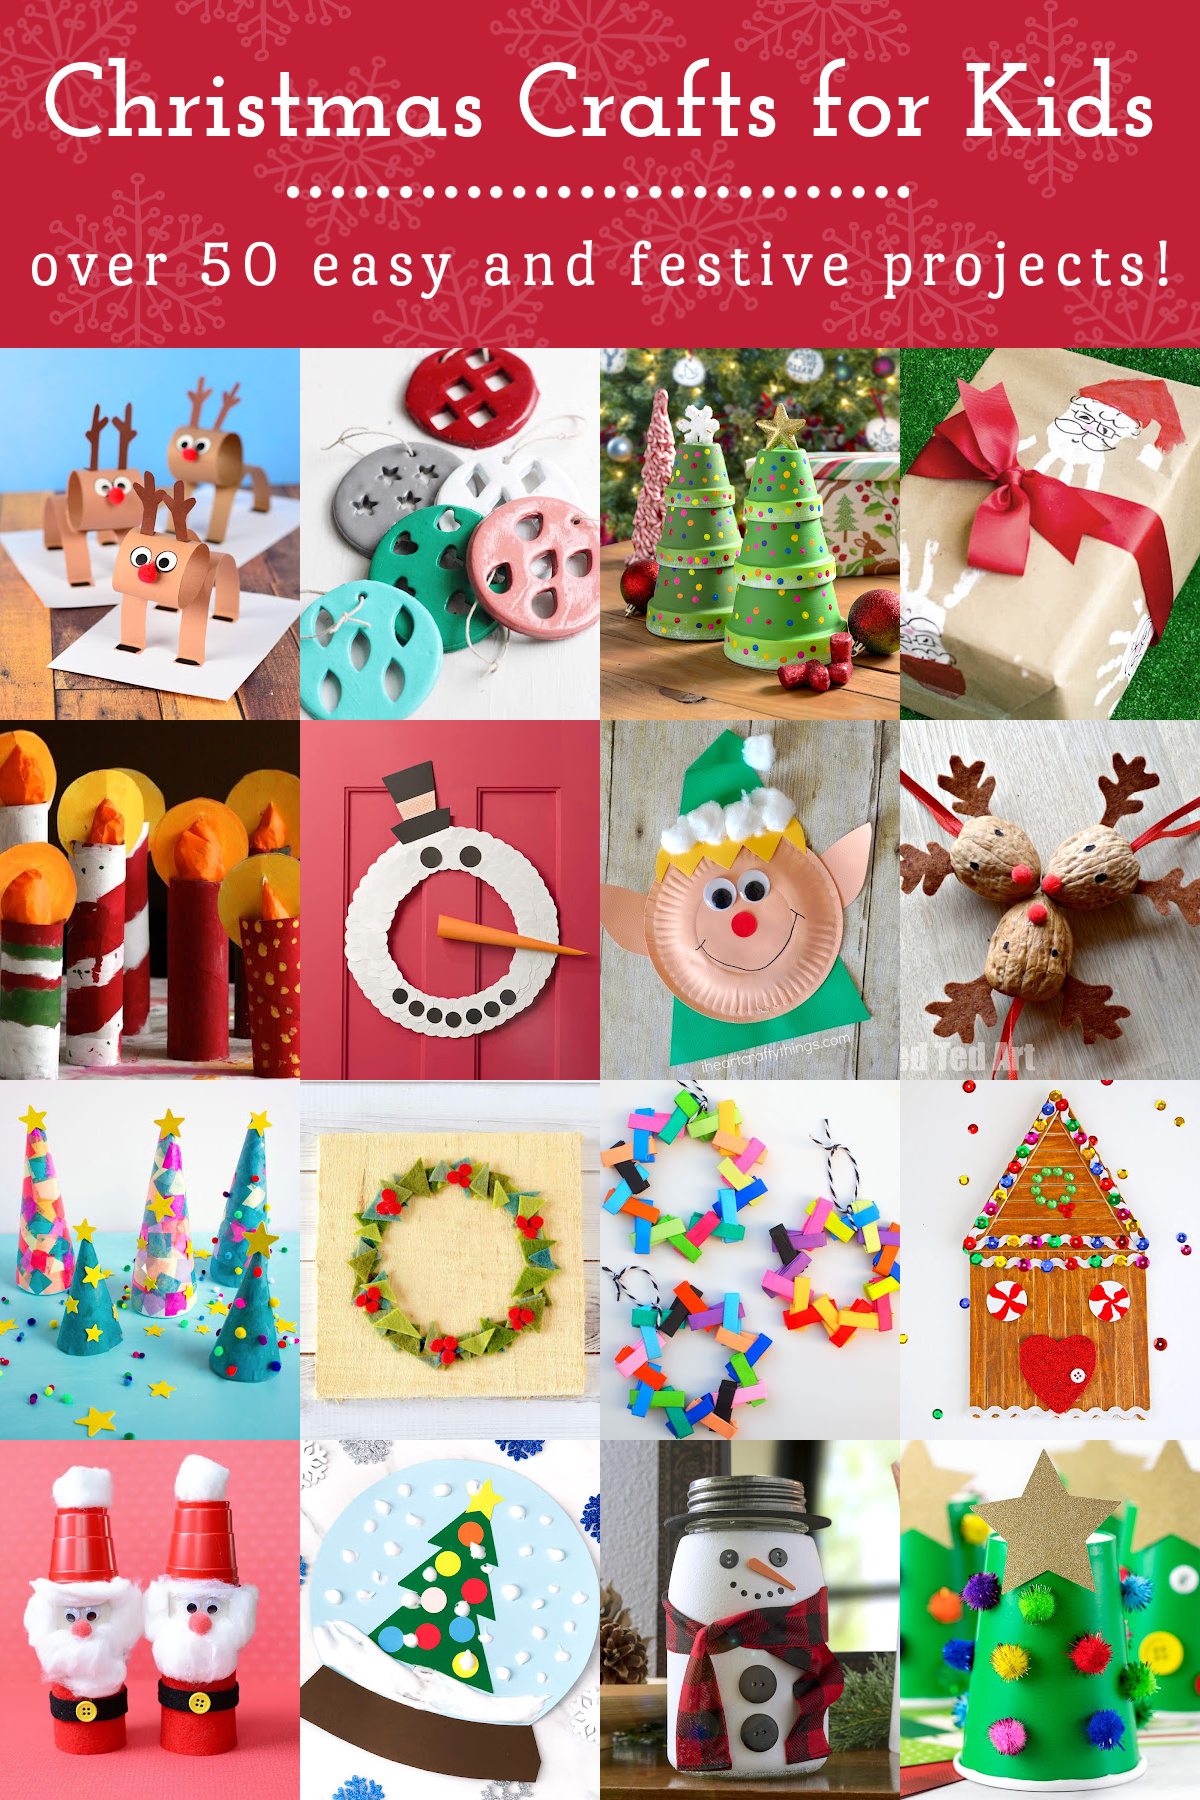 5 easy Christmas crafts to make with kids